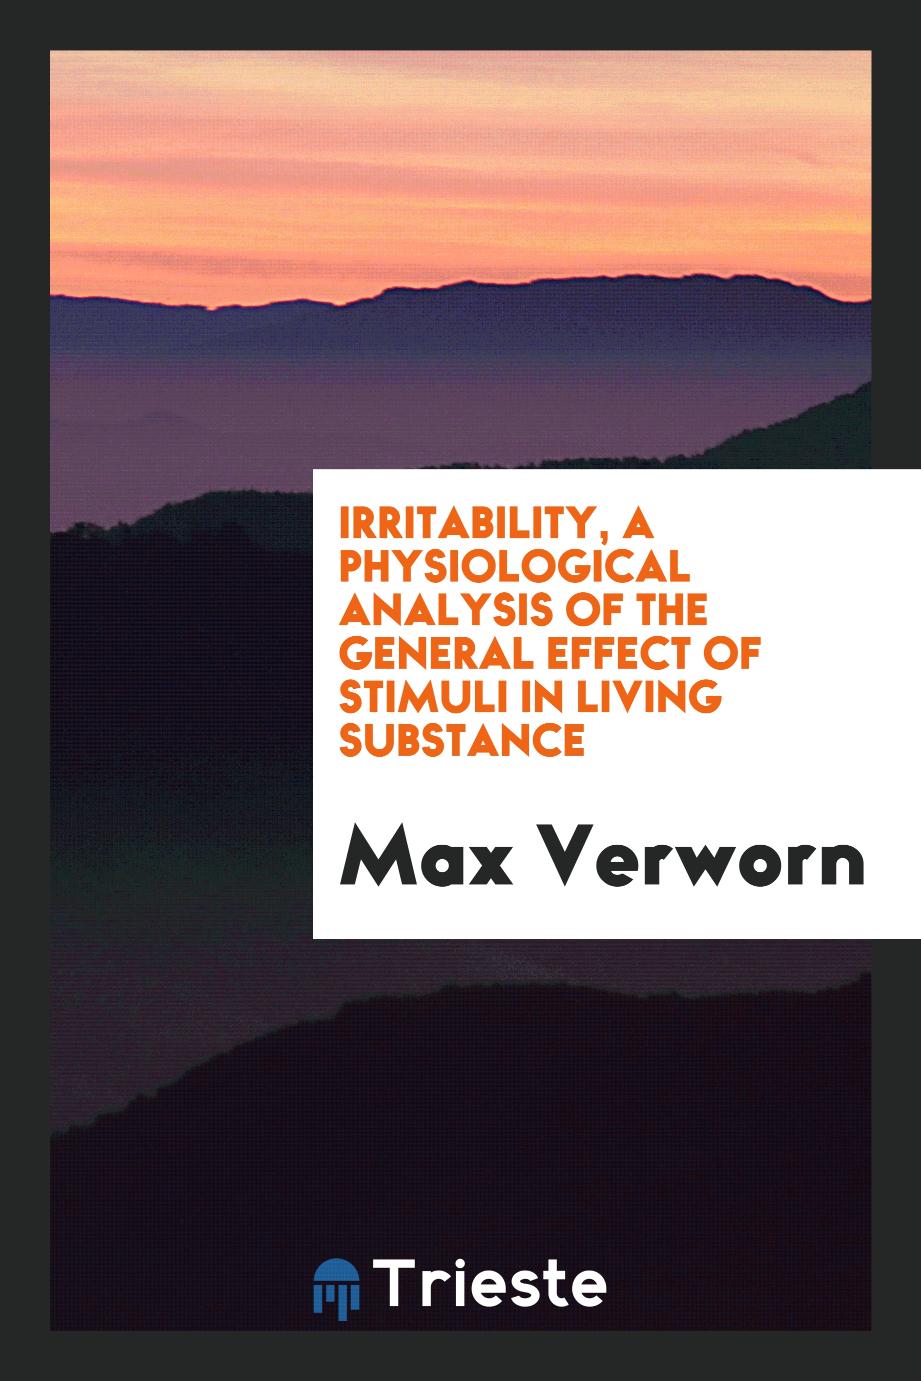 Irritability, a physiological analysis of the general effect of stimuli in living substance